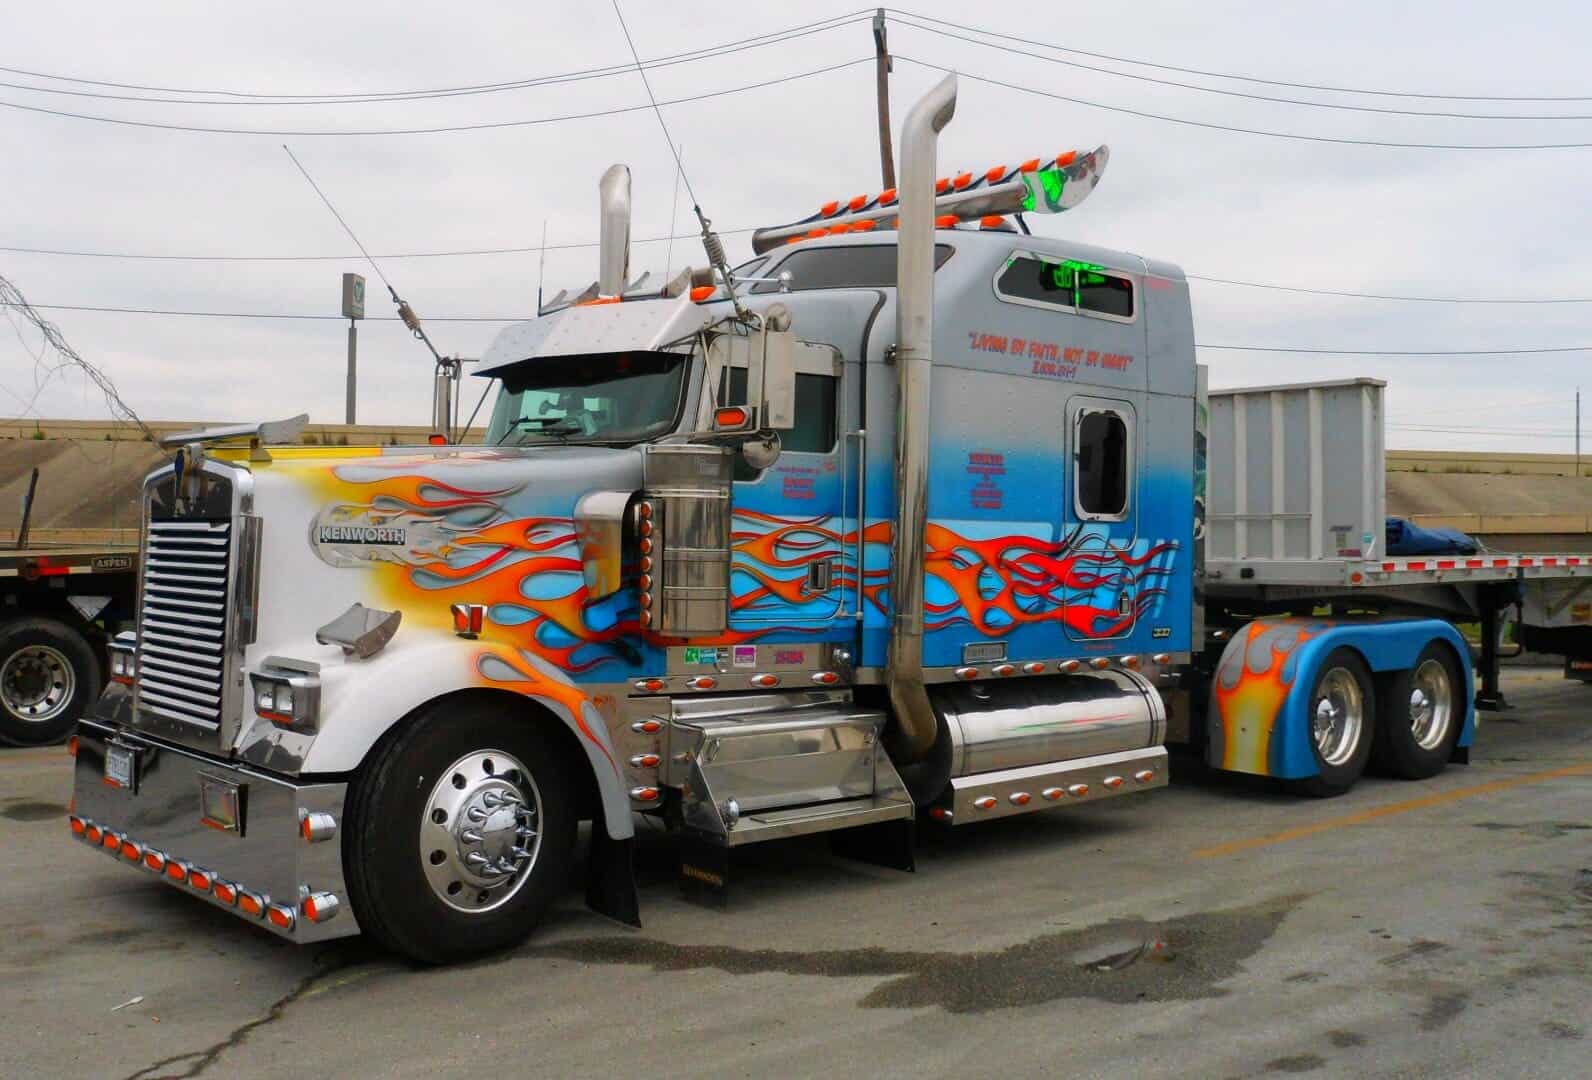 Kenworth Show Truck Photo Gallery - Our Best Collection of ...